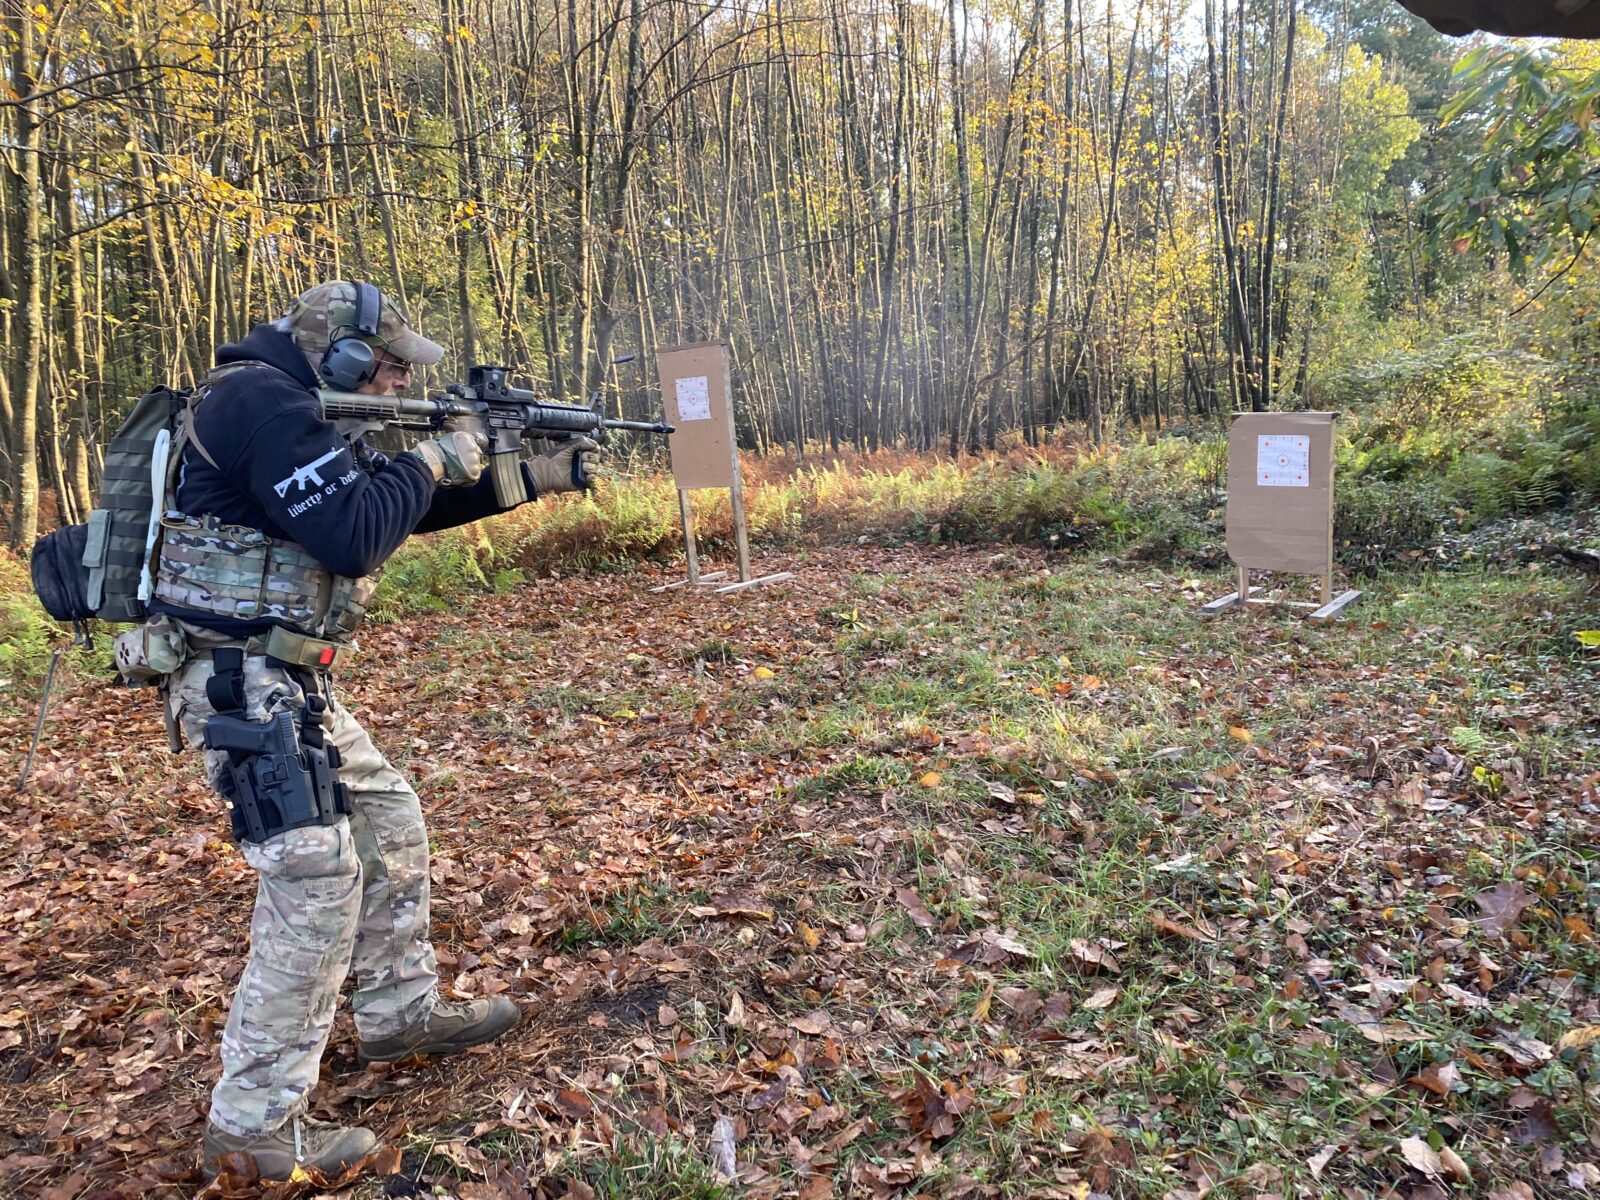 Pennsylvania Volunteer Militia member Bob Gardner shoots an AR-15 rifle during a militia training weekend at a remote part of Pennsylvania’s Allegheny Plateau in October. Gardner has shown up to protests around the country with other militias as a kind of self-appointed security force, which some experts say can increase the potential for violence.